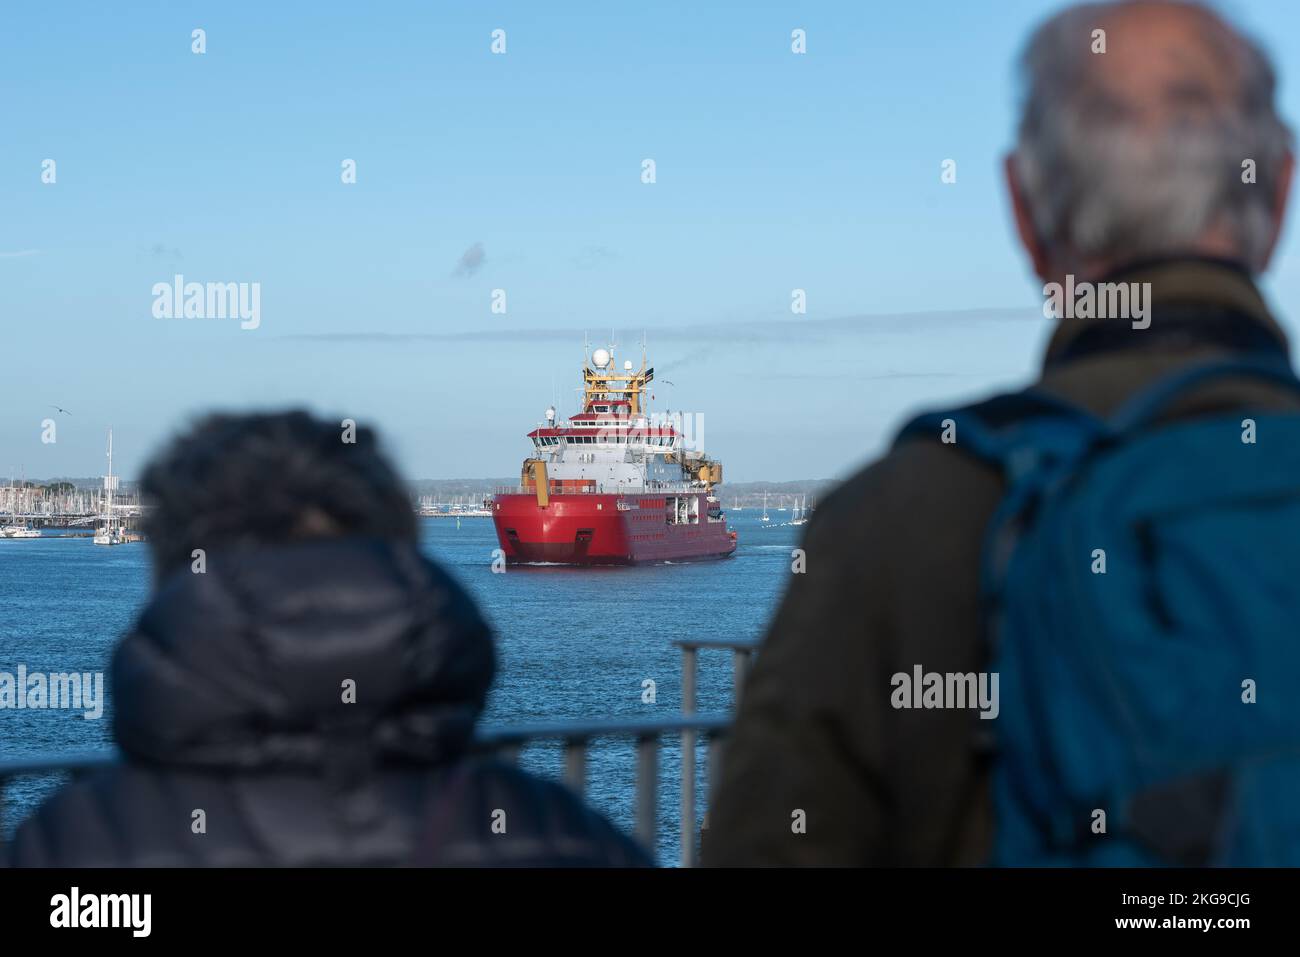 RRS Sir David Attenborough ship leaving Portsmouth harbour in England on it's way to Antarctica for research watched by a group of spectators. Stock Photo